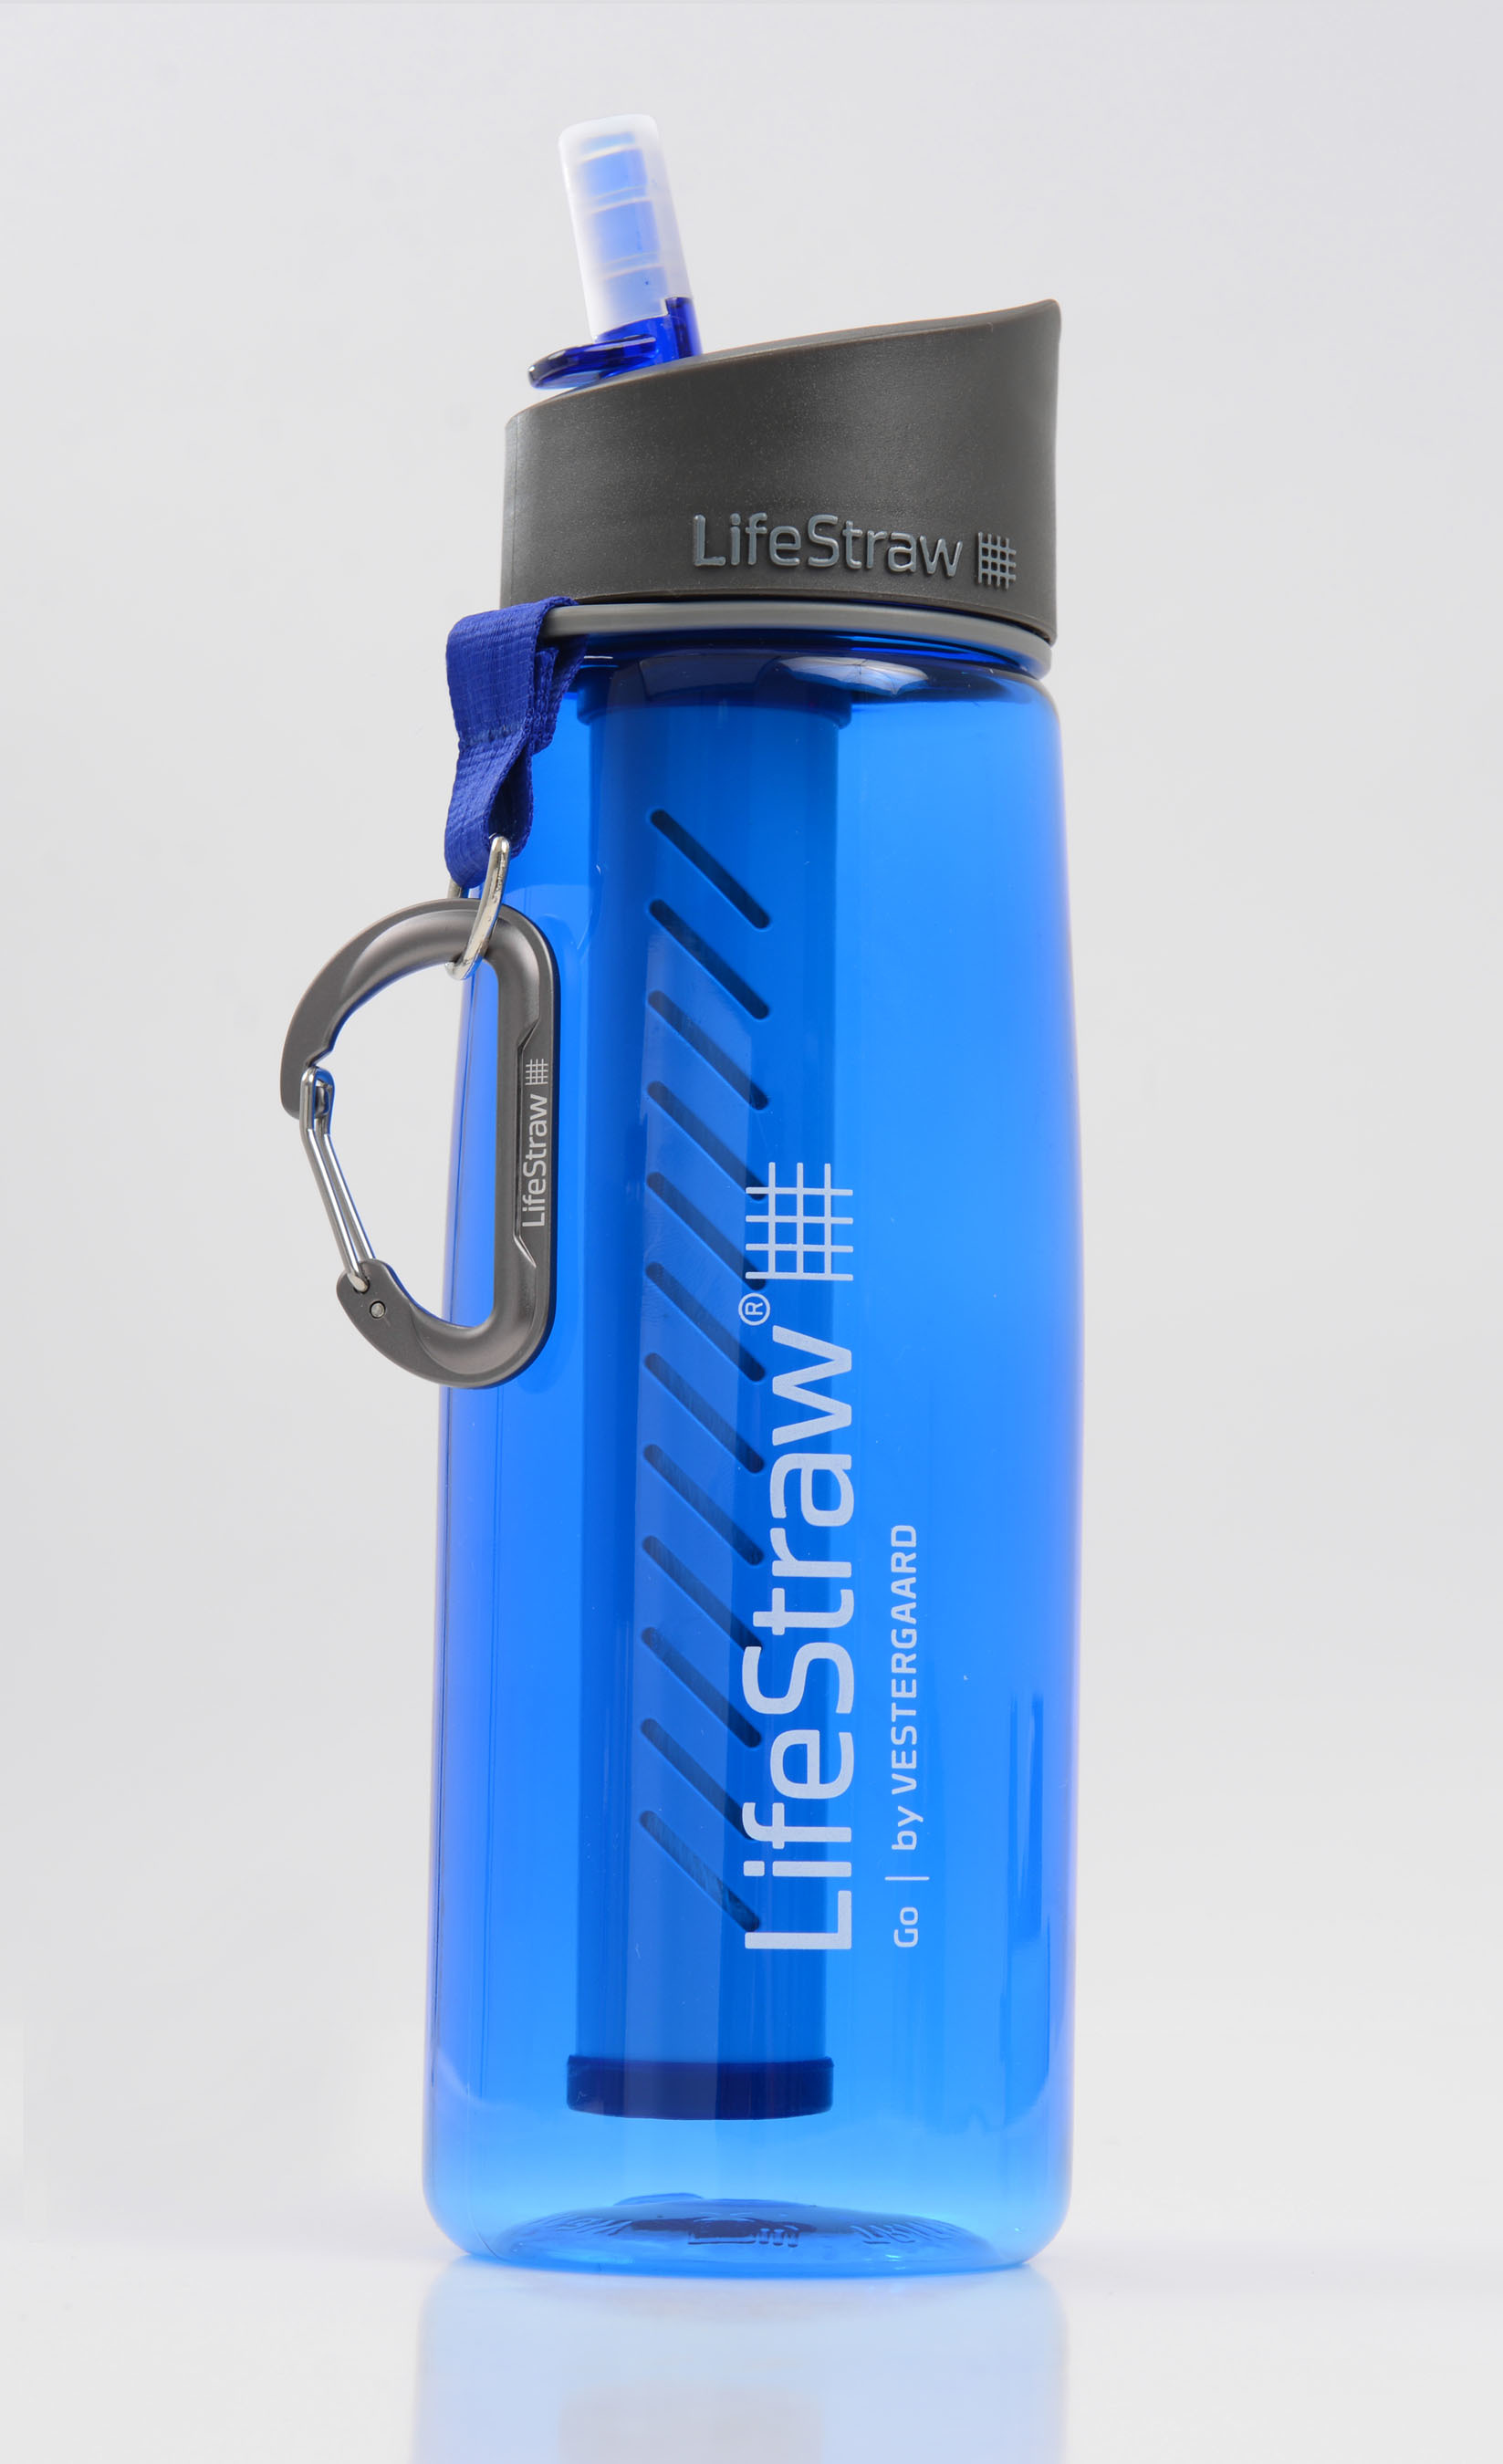 New LifeStraw(R) Go lightweight, reusable water bottle transforms contaminated water into safe drinking water. The new water filter is ideal for hikers, travelers, outdoor enthusiasts and everyday use. For each purchase of any life-saving LifeStraw(R) product, one school child in Africa will receive clean drinking water for an entire school year.